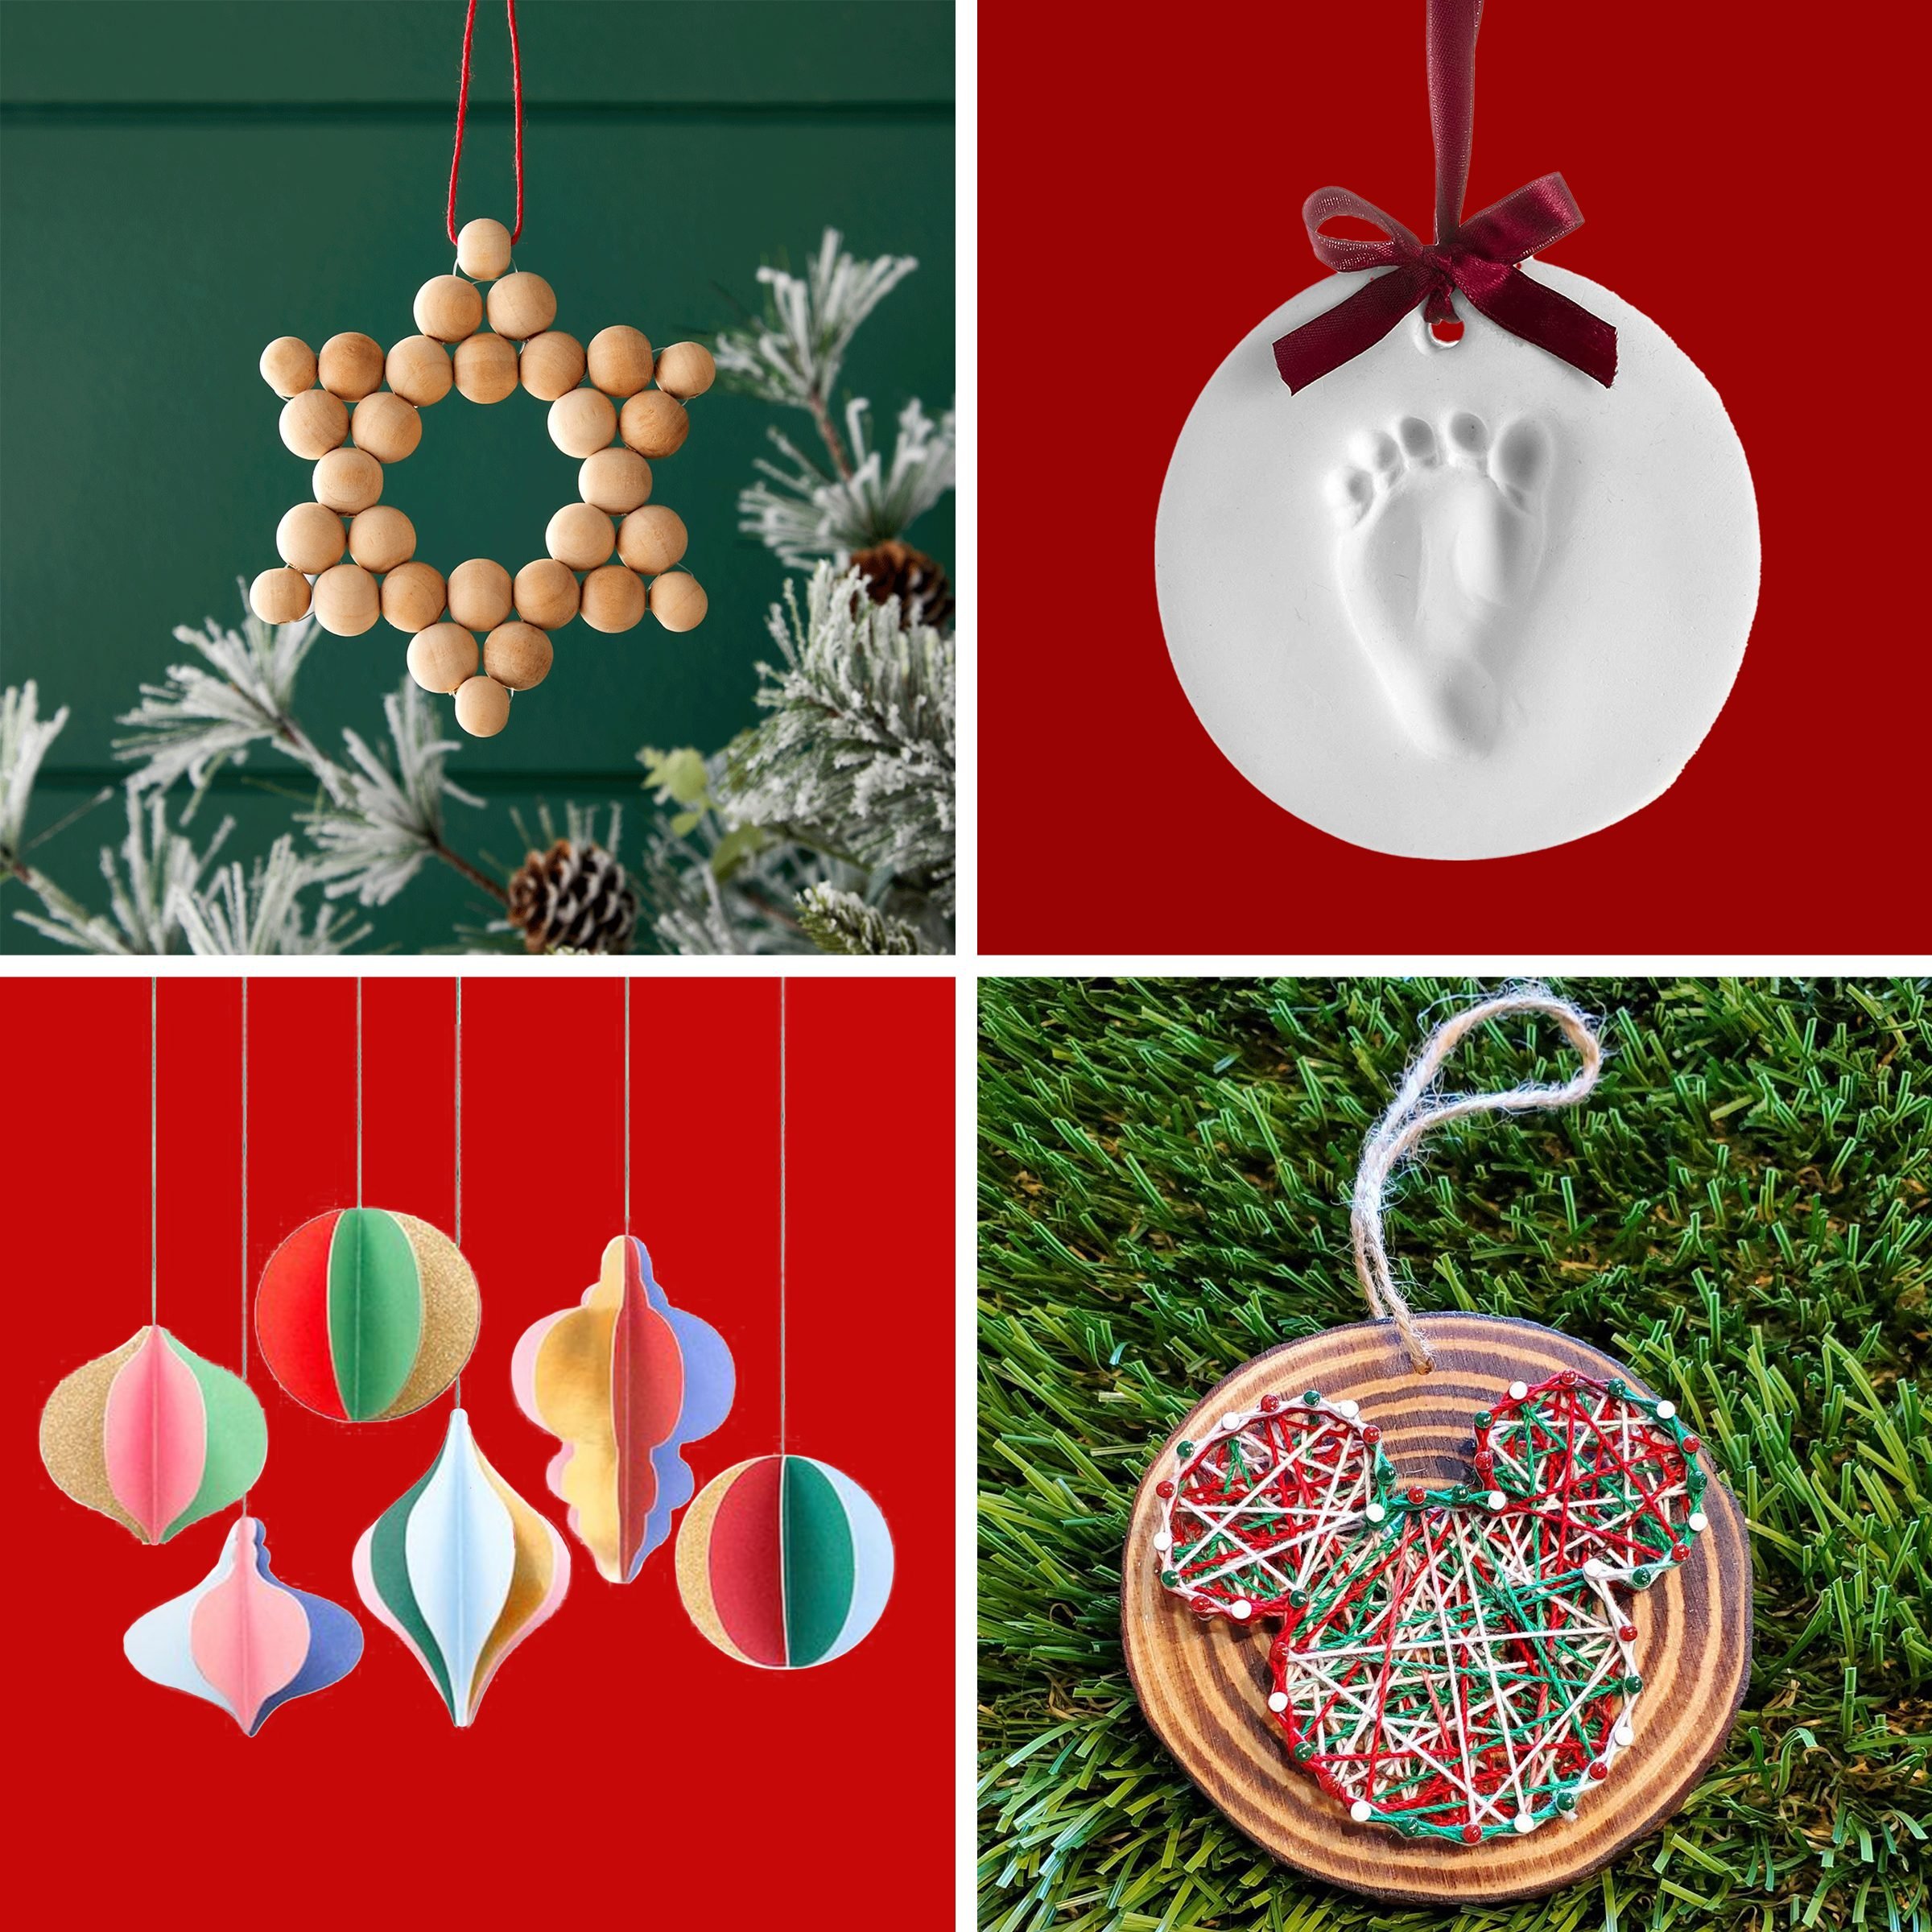 https://www.rd.com/wp-content/uploads/2017/12/75-DIY-Christmas-Ornaments-That-Will-Make-Your-Tree-Extra-Special-Opener-via-Retailers-4.jpg?fit=700%2C700